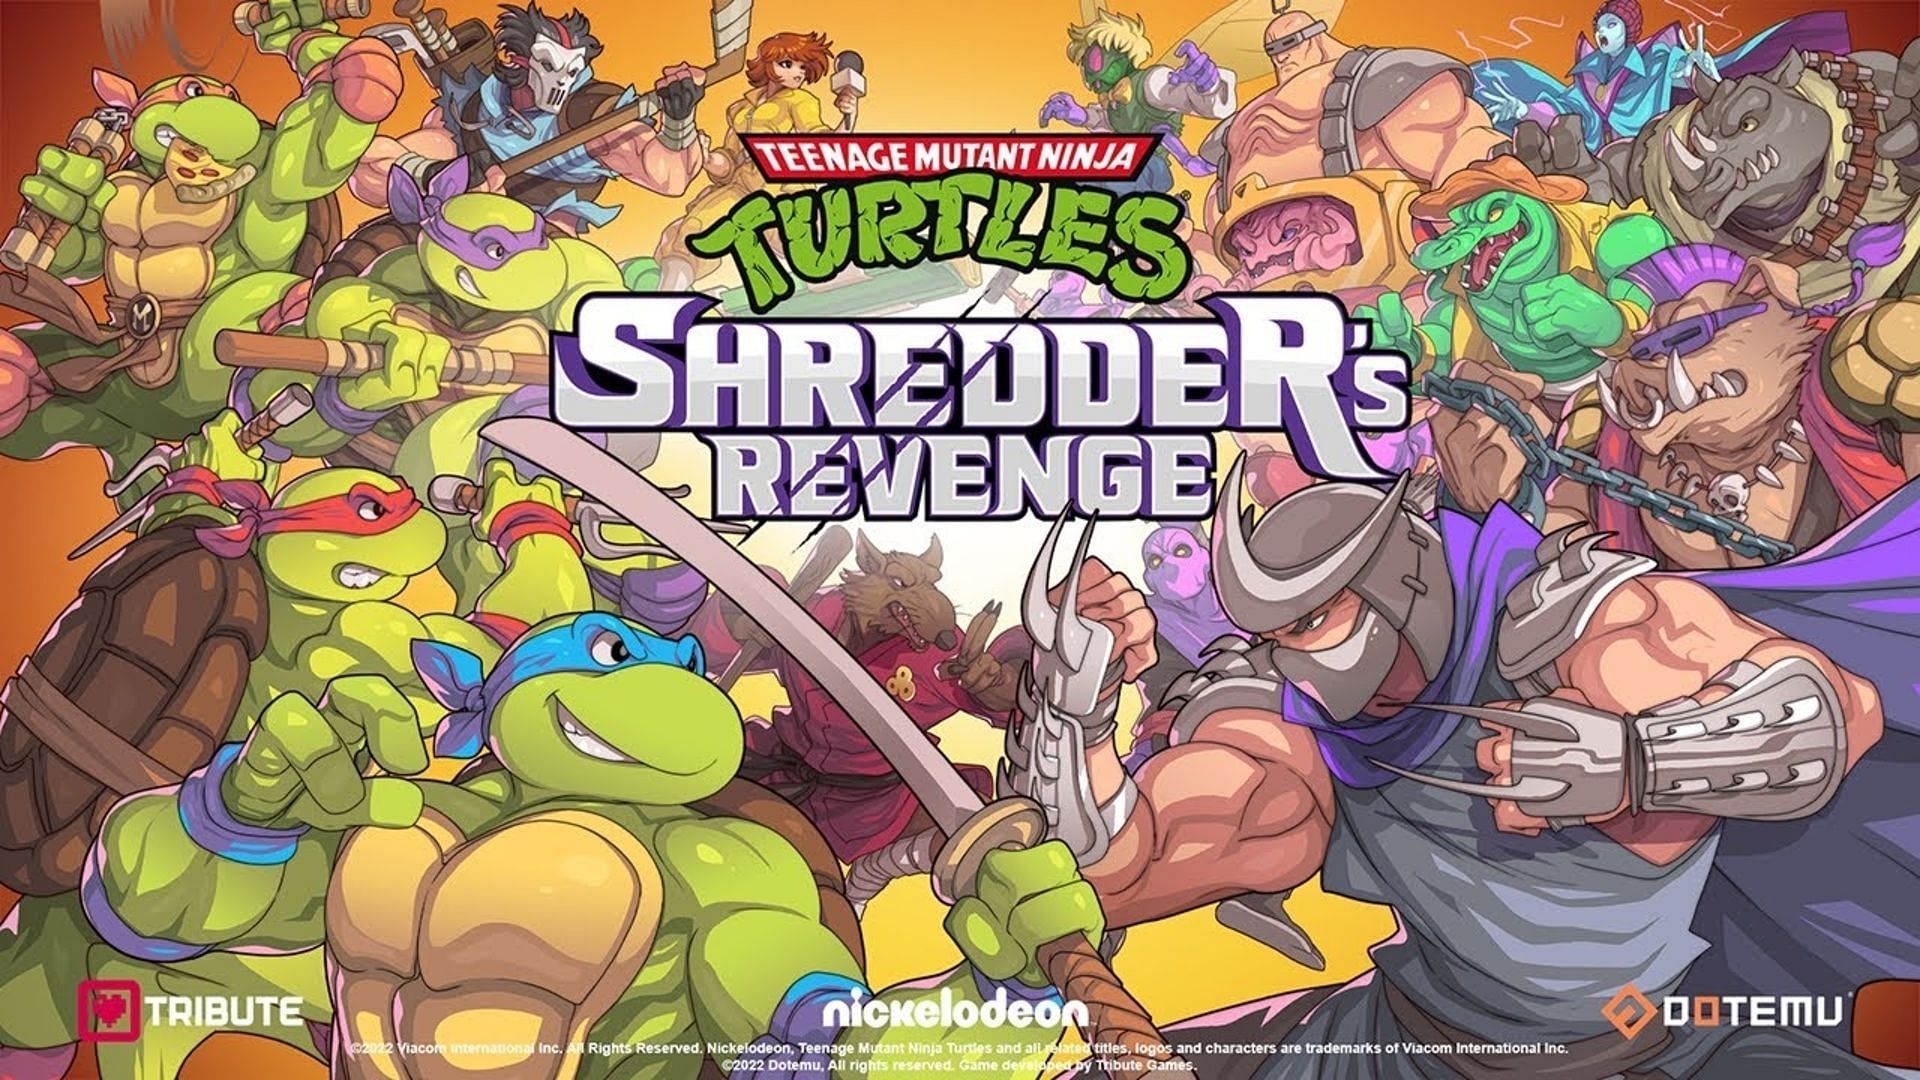 Many familiar characters from the Teenage Mutant Ninja Turtles franchise are in this game (Image via Tribute Games)